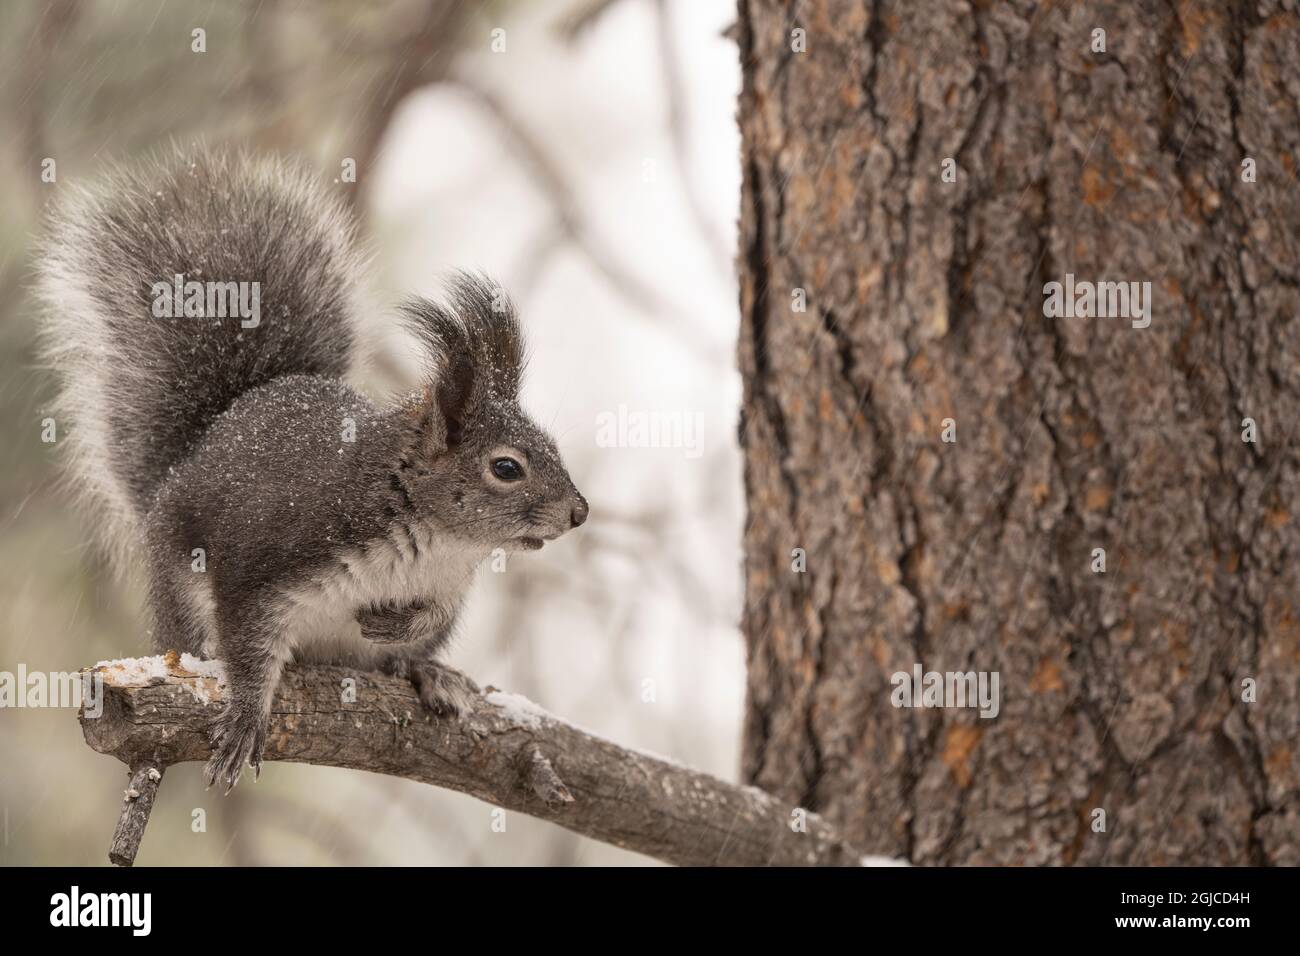 USA, Colorado, Pike National Forest. Abert's squirrel on Ponderosa pine tree during snowstorm. Stock Photo